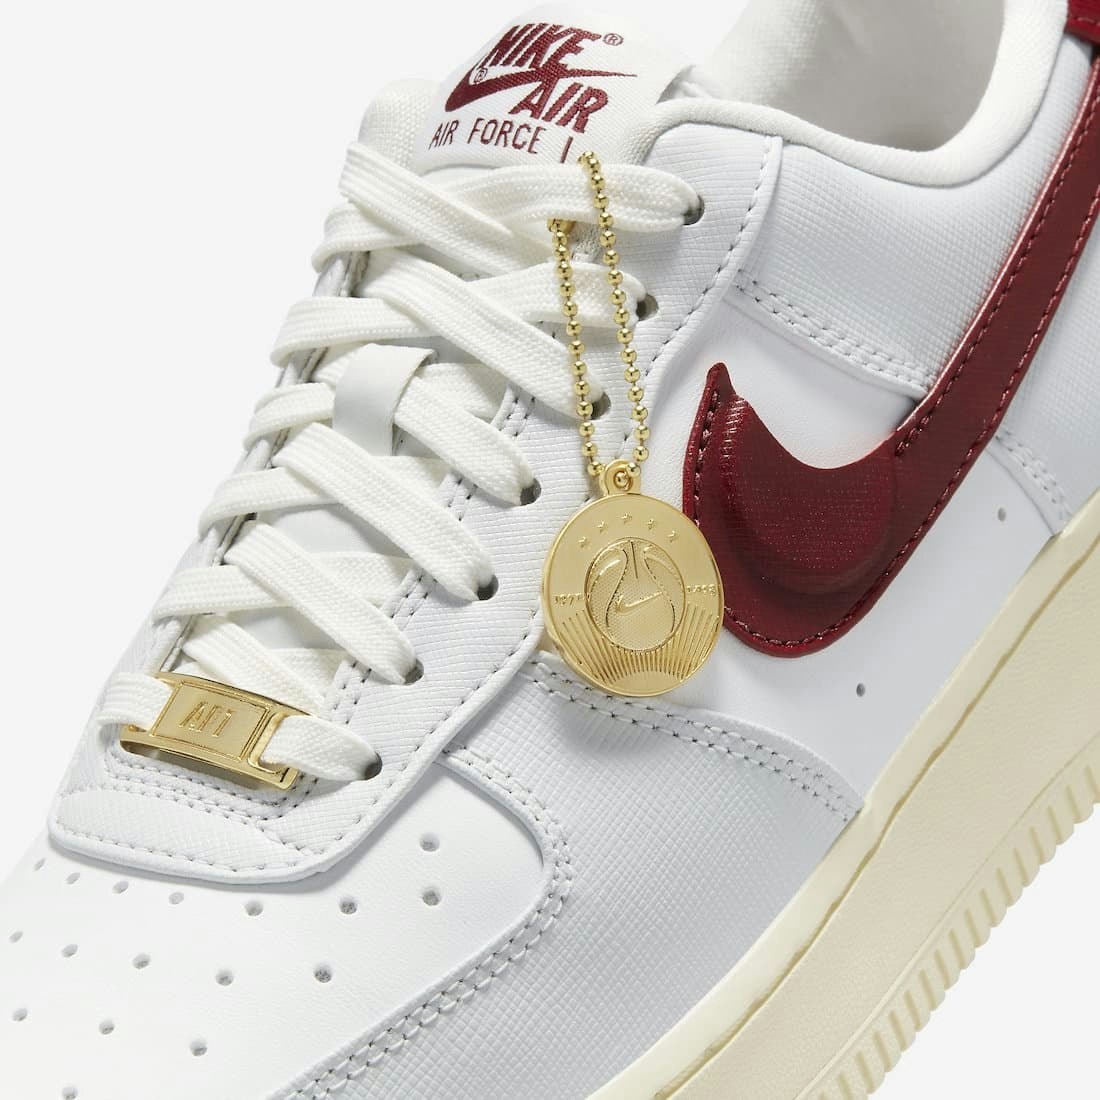 Nike Air Force 1 Low "Just Do It" (Photon Dust)